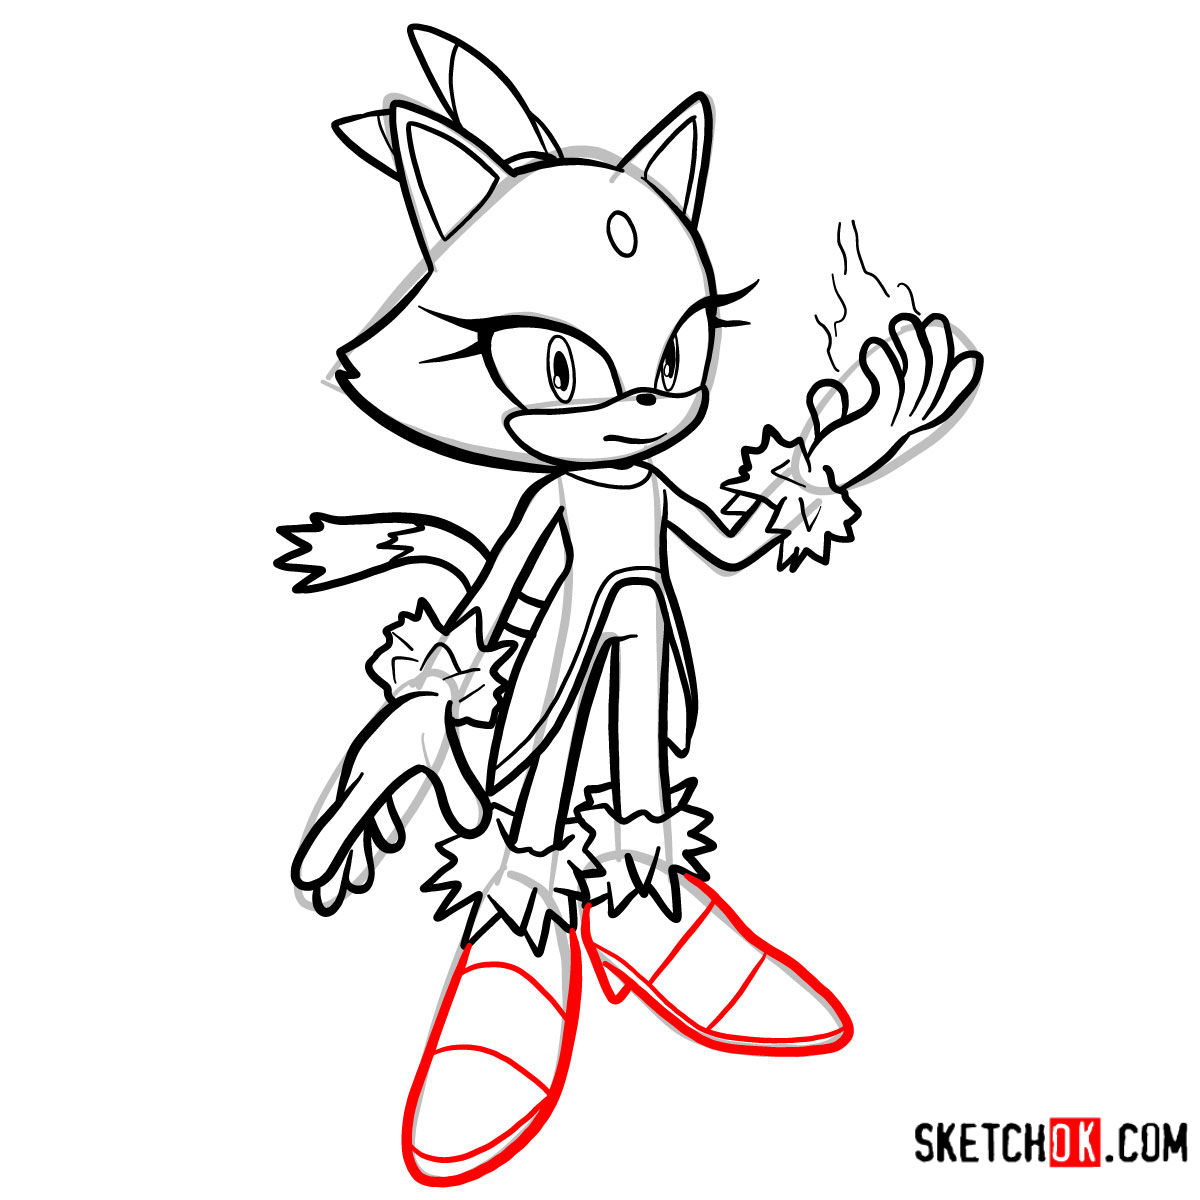 How to draw Blaze the Cat Sonic the Hedgehog